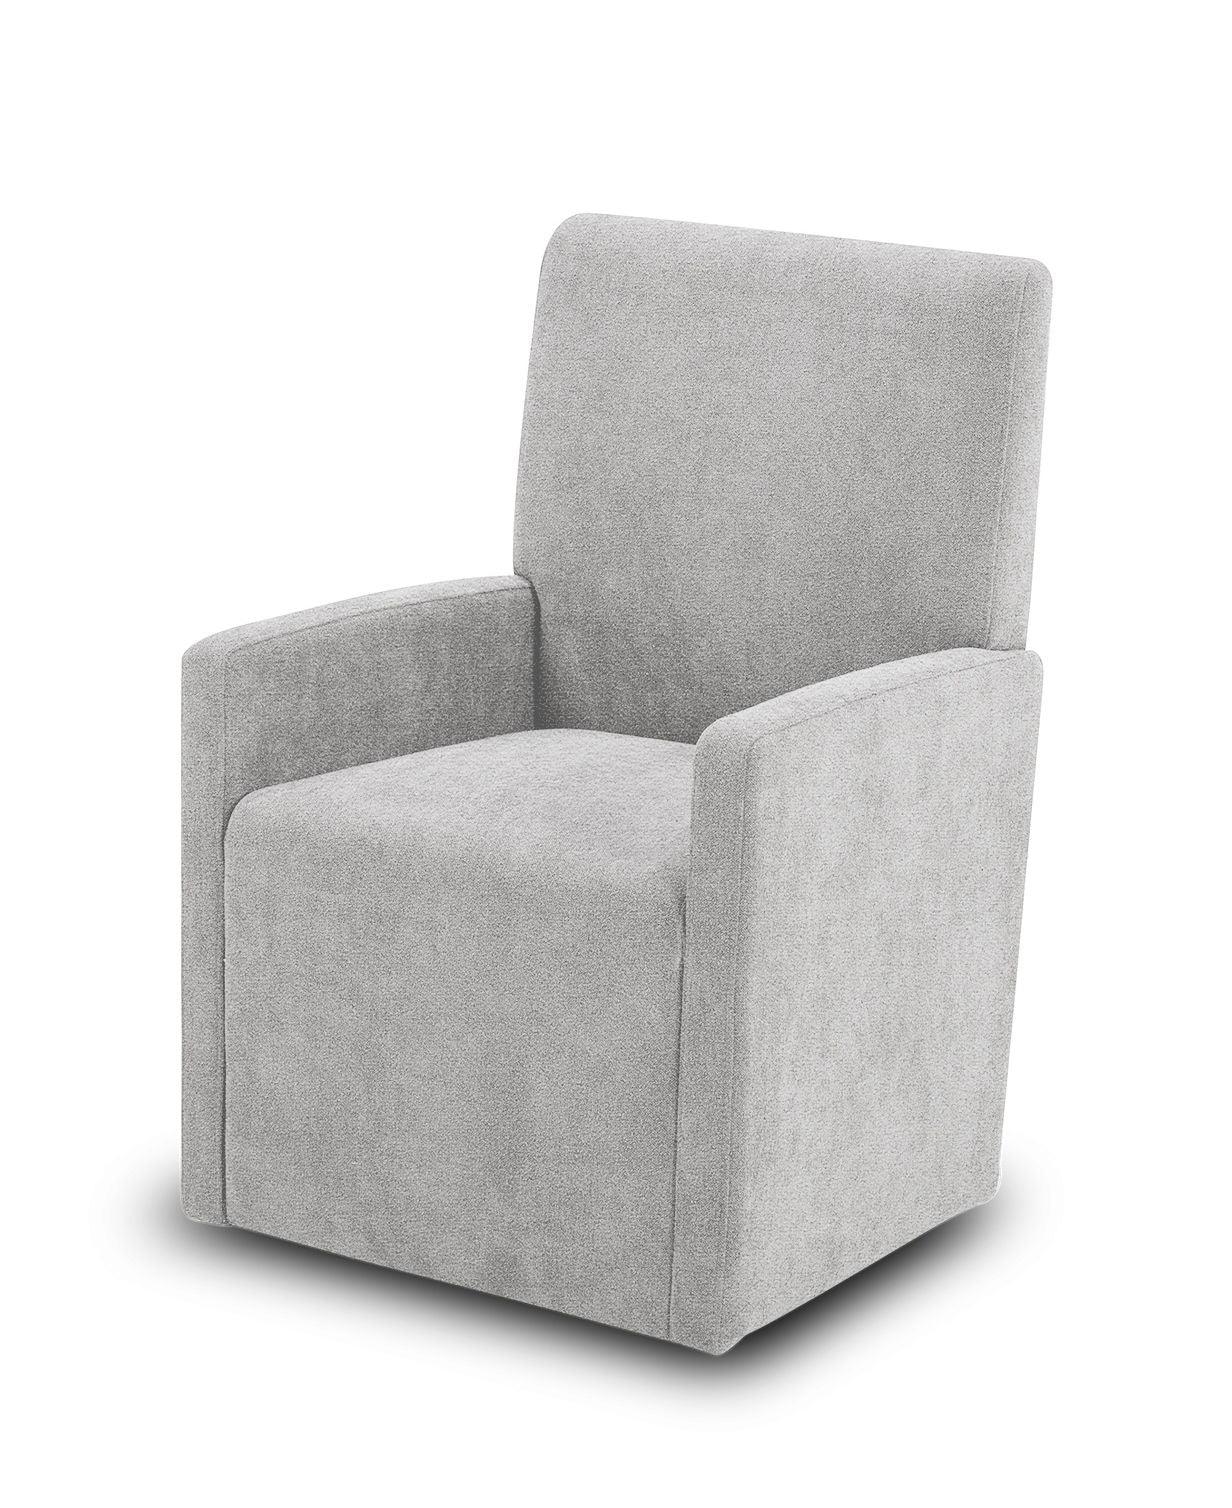 Parker House Furniture - Escape - Dining Upholstered Caster Chair - Mirage Mist - 5th Avenue Furniture